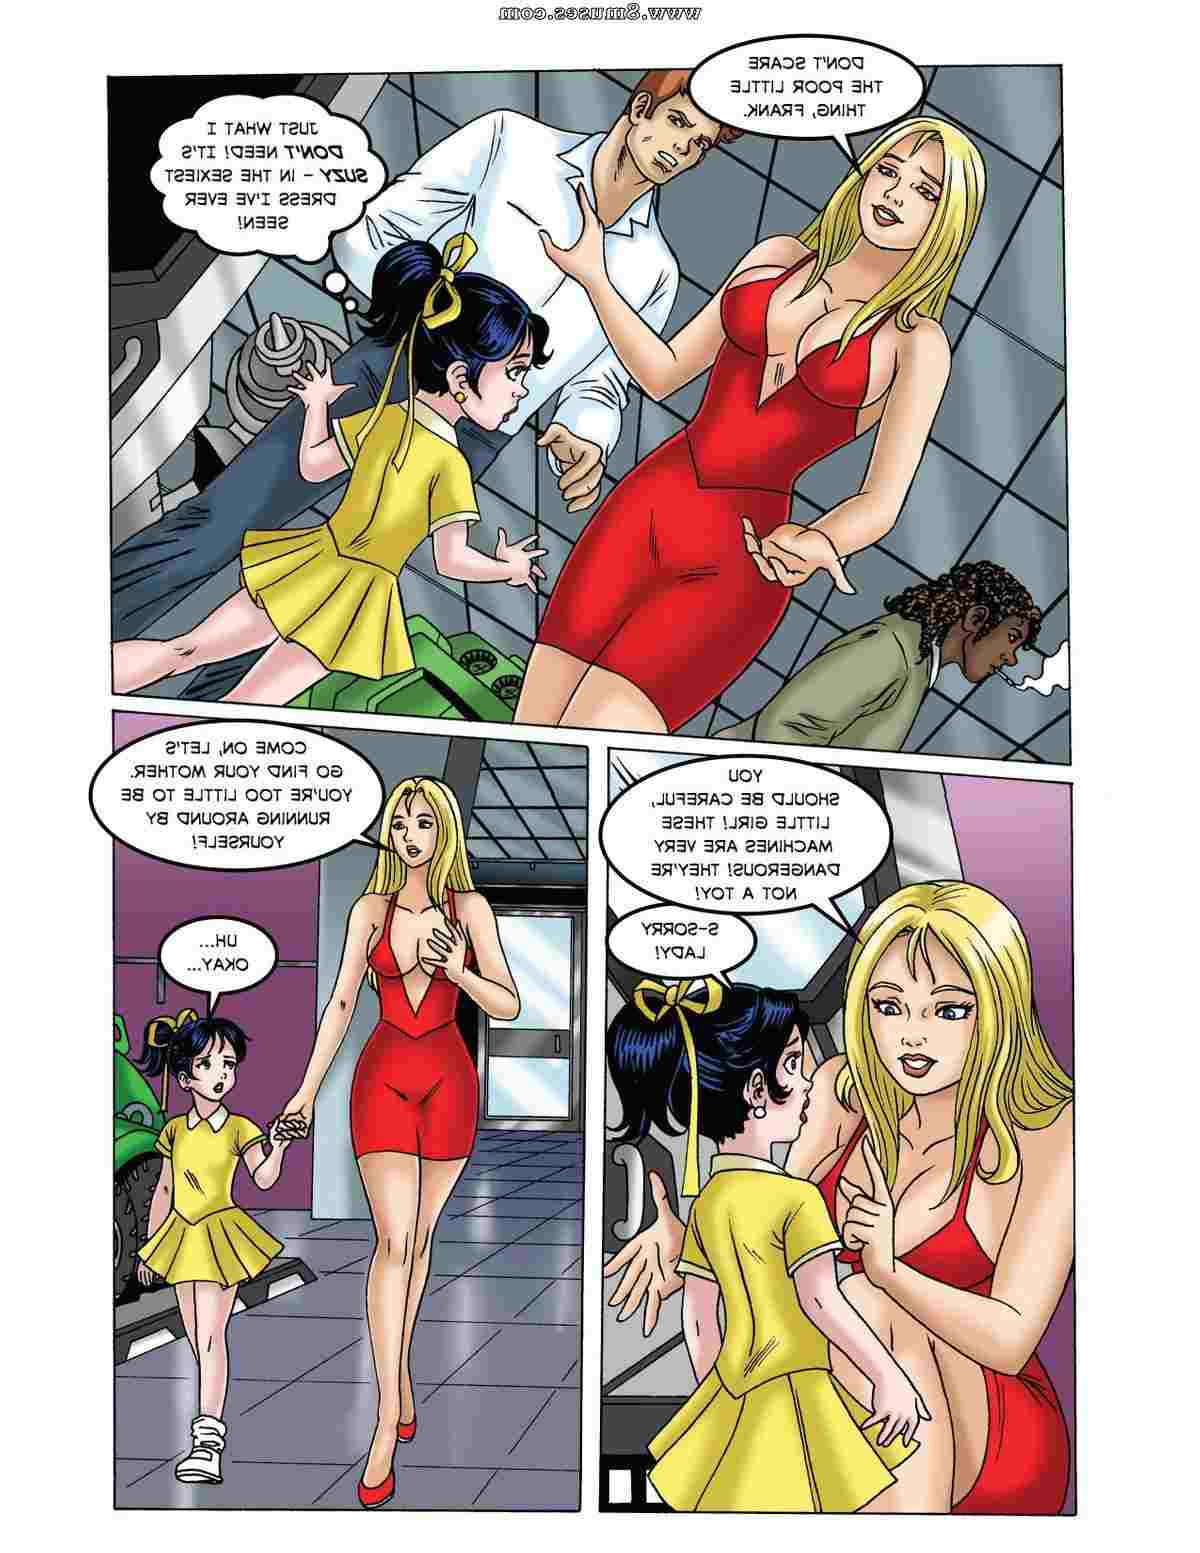 DreamTales-Comics/Crybaby-Marilyn Crybaby_Marilyn__8muses_-_Sex_and_Porn_Comics_21.jpg